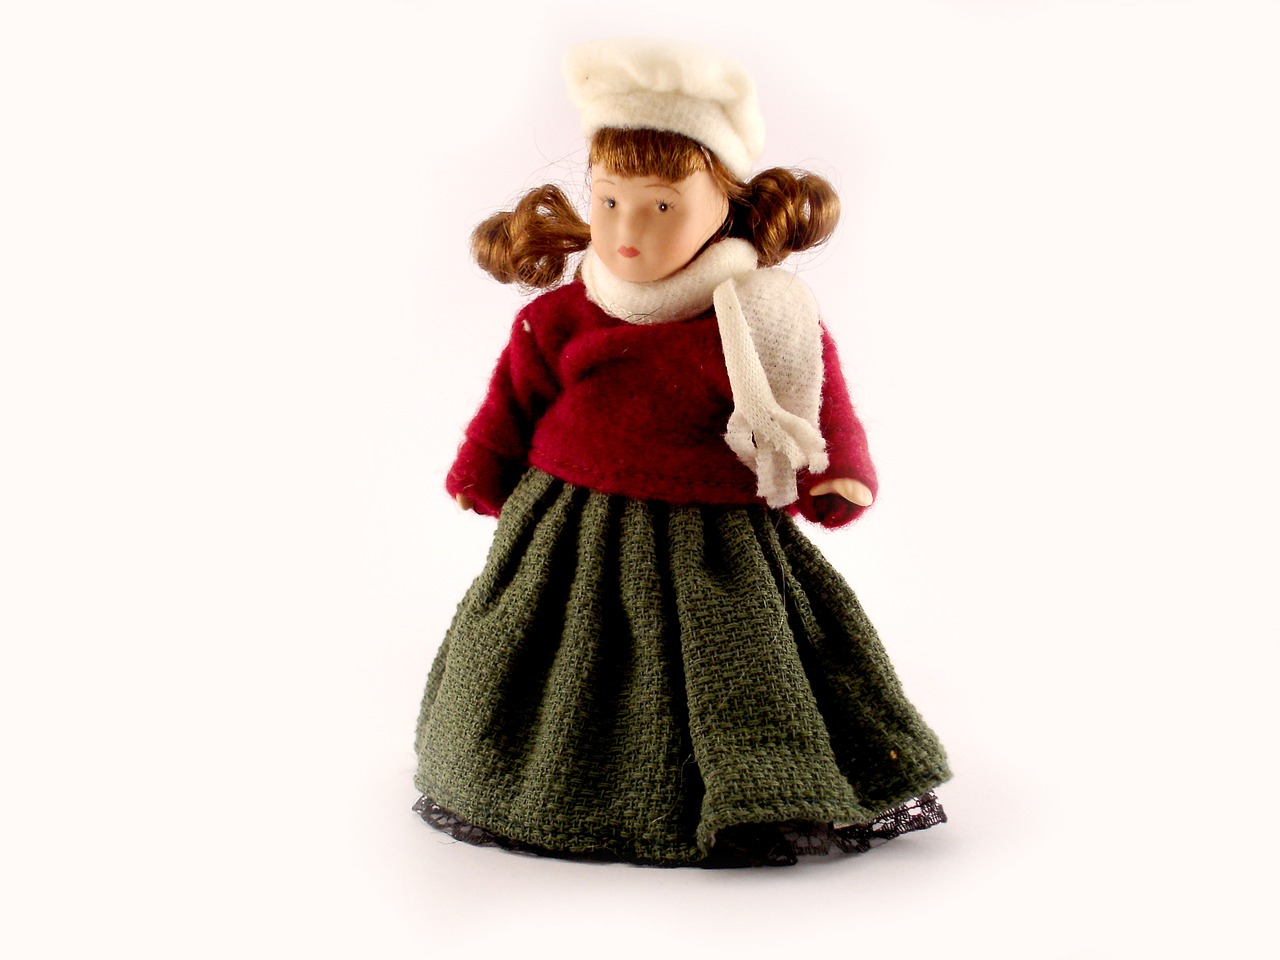 Image - doll toy old toy cloth dress